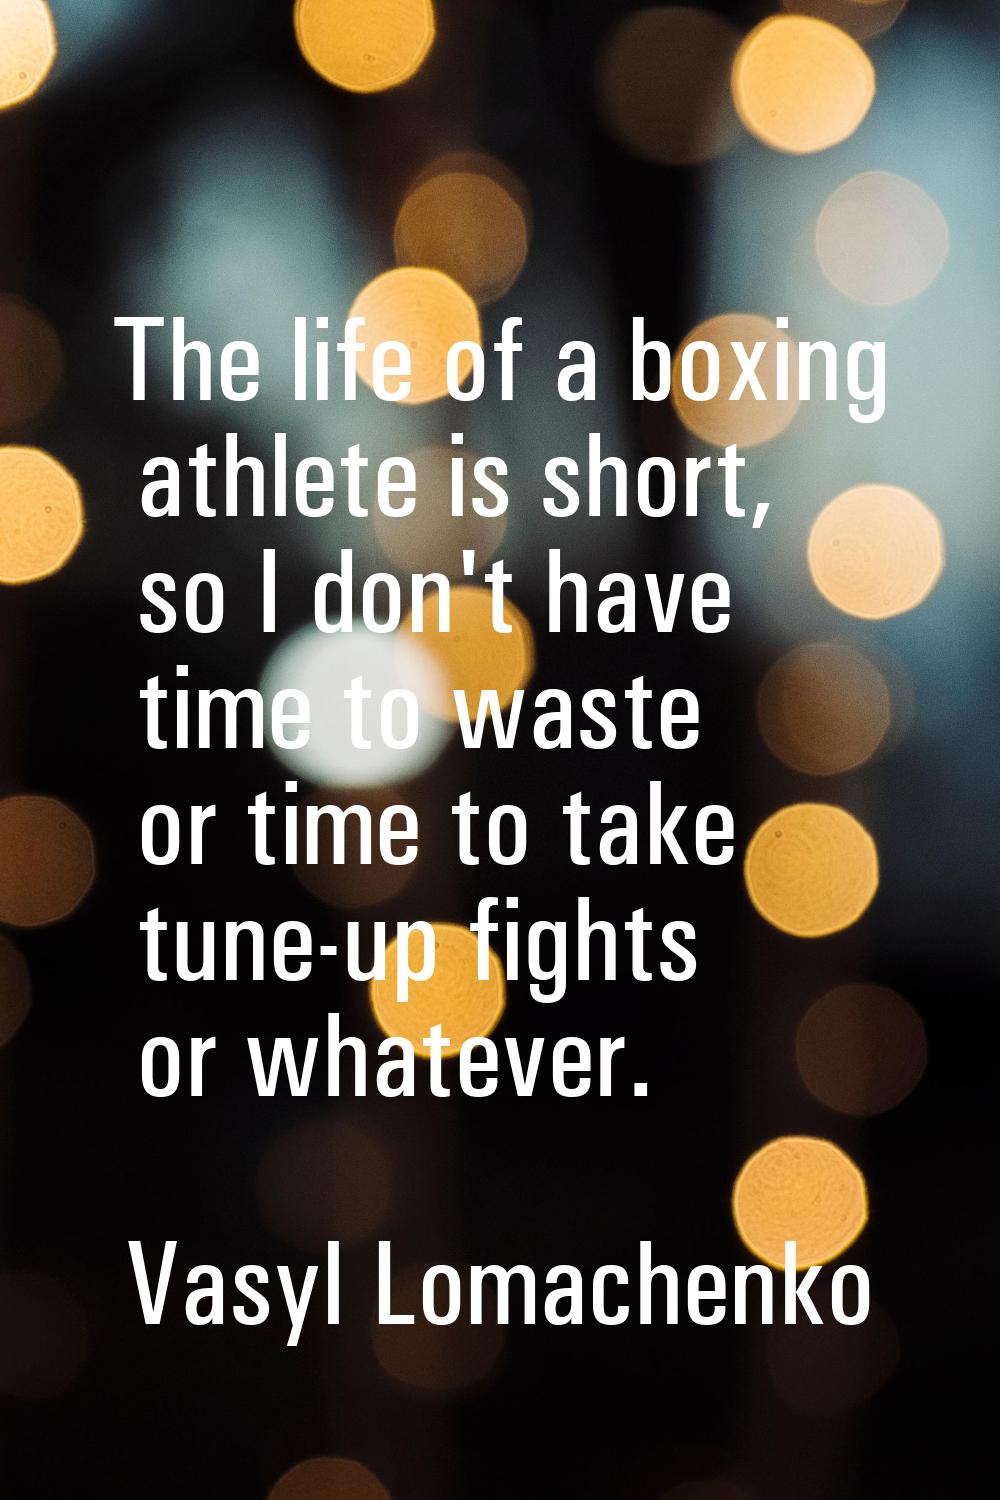 The life of a boxing athlete is short, so I don't have time to waste or time to take tune-up fights